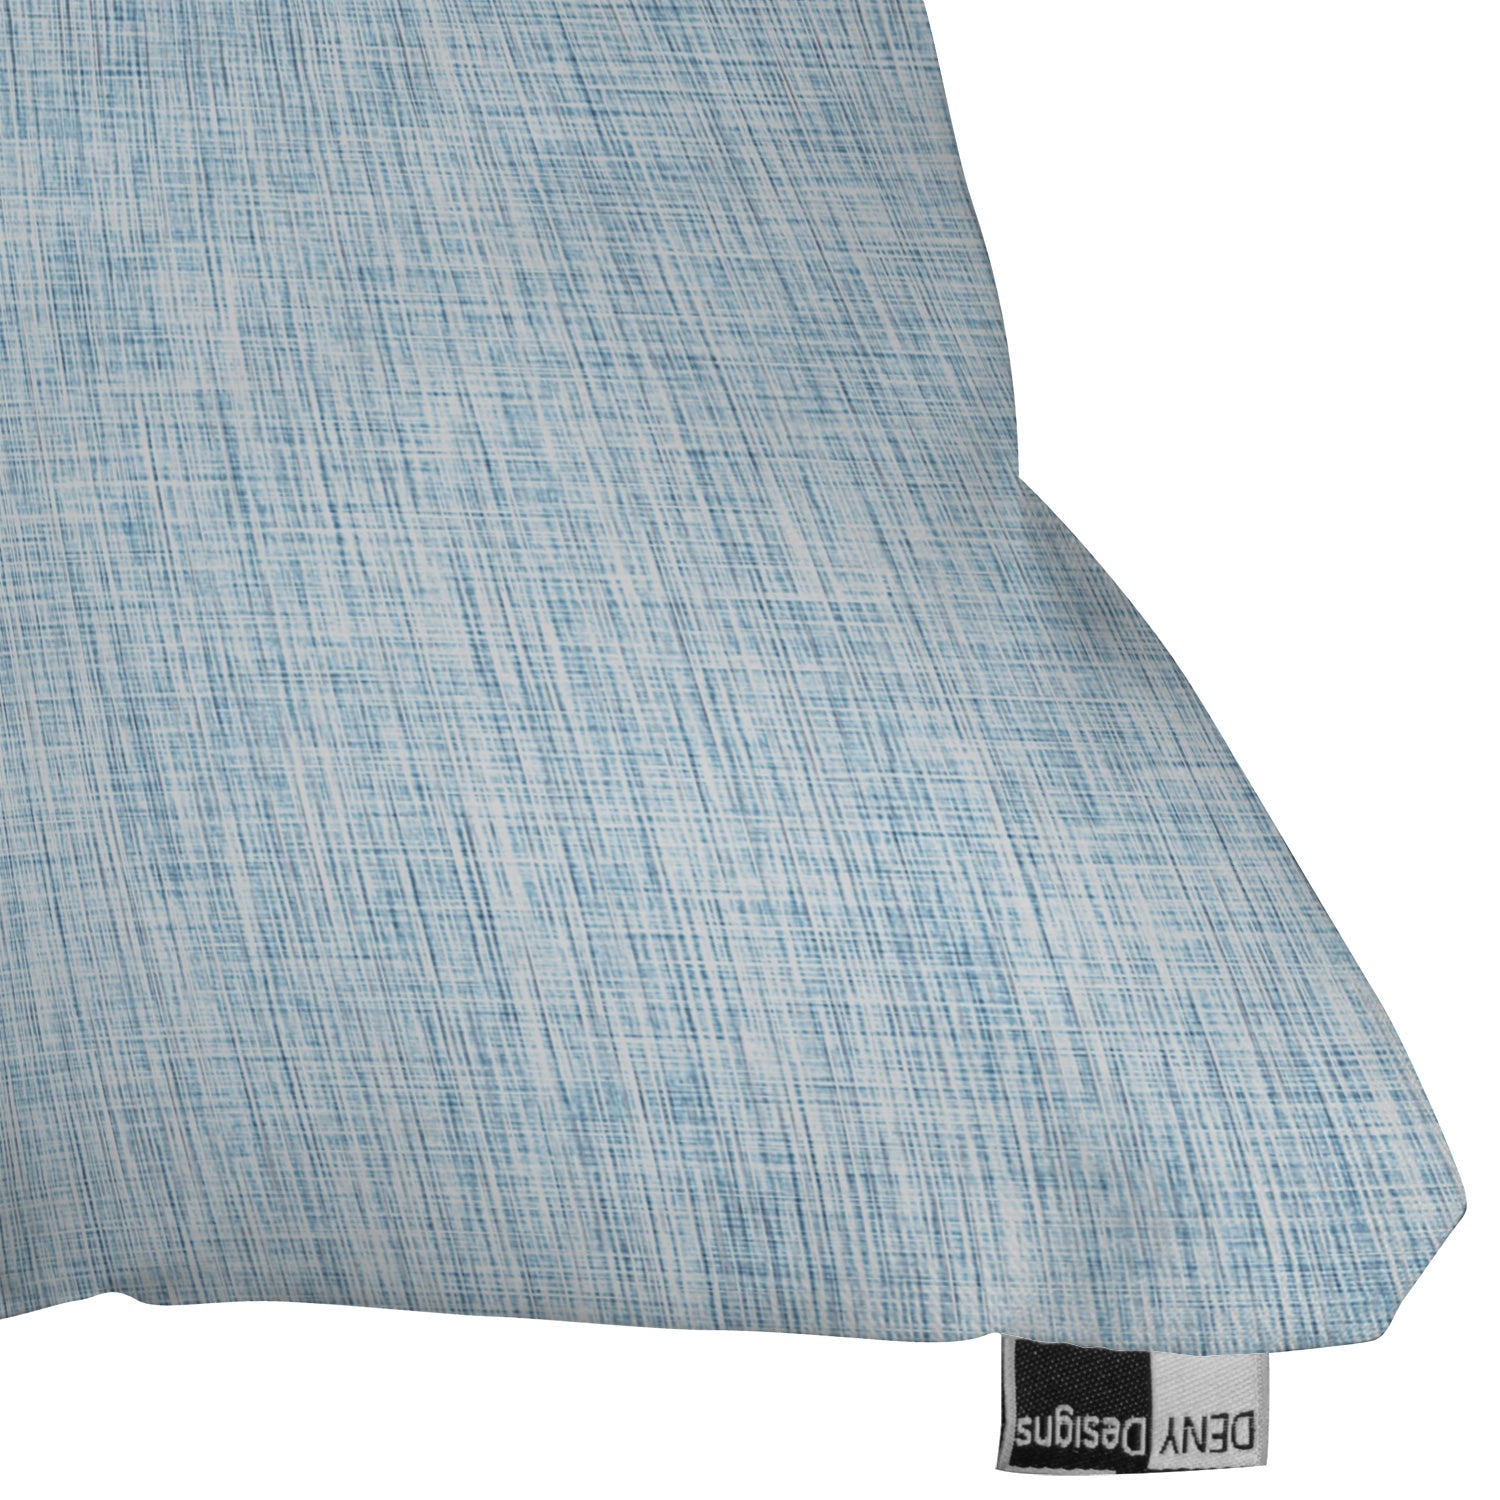 Linen Acid-Wash Throw Pillow with insert, Blue, 20" x 20" - Image 2